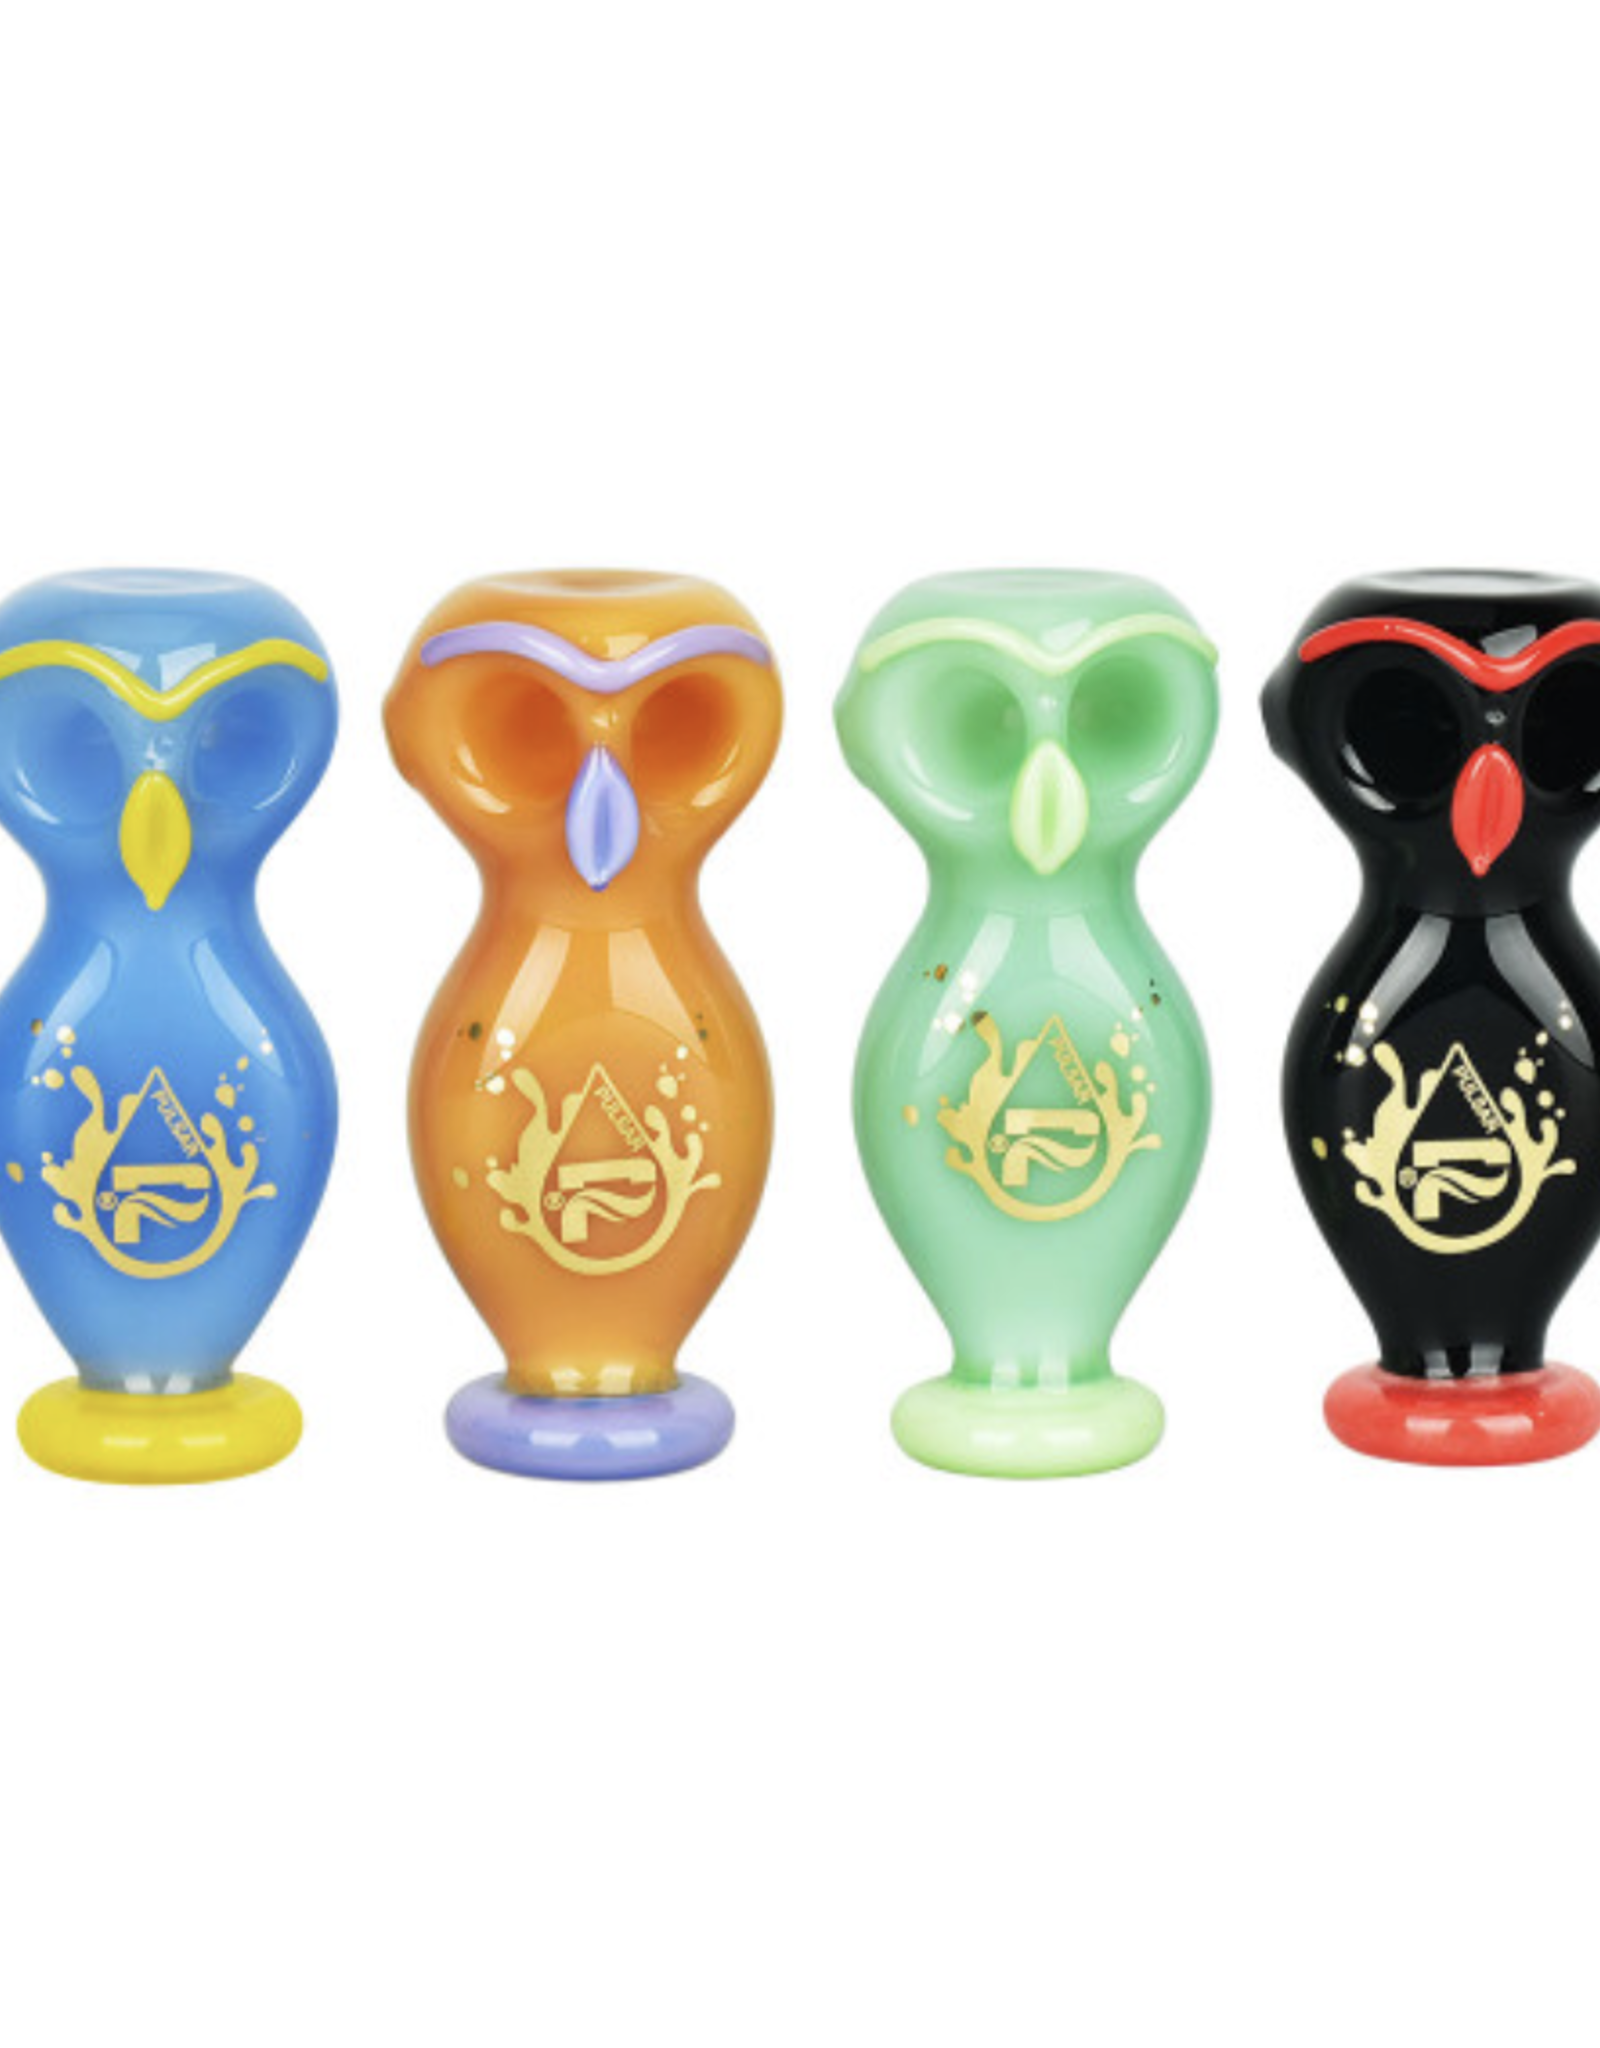 Pulsar 4" Wise Owl Double Bowl Pipe by Pulsar - Assorted Colours